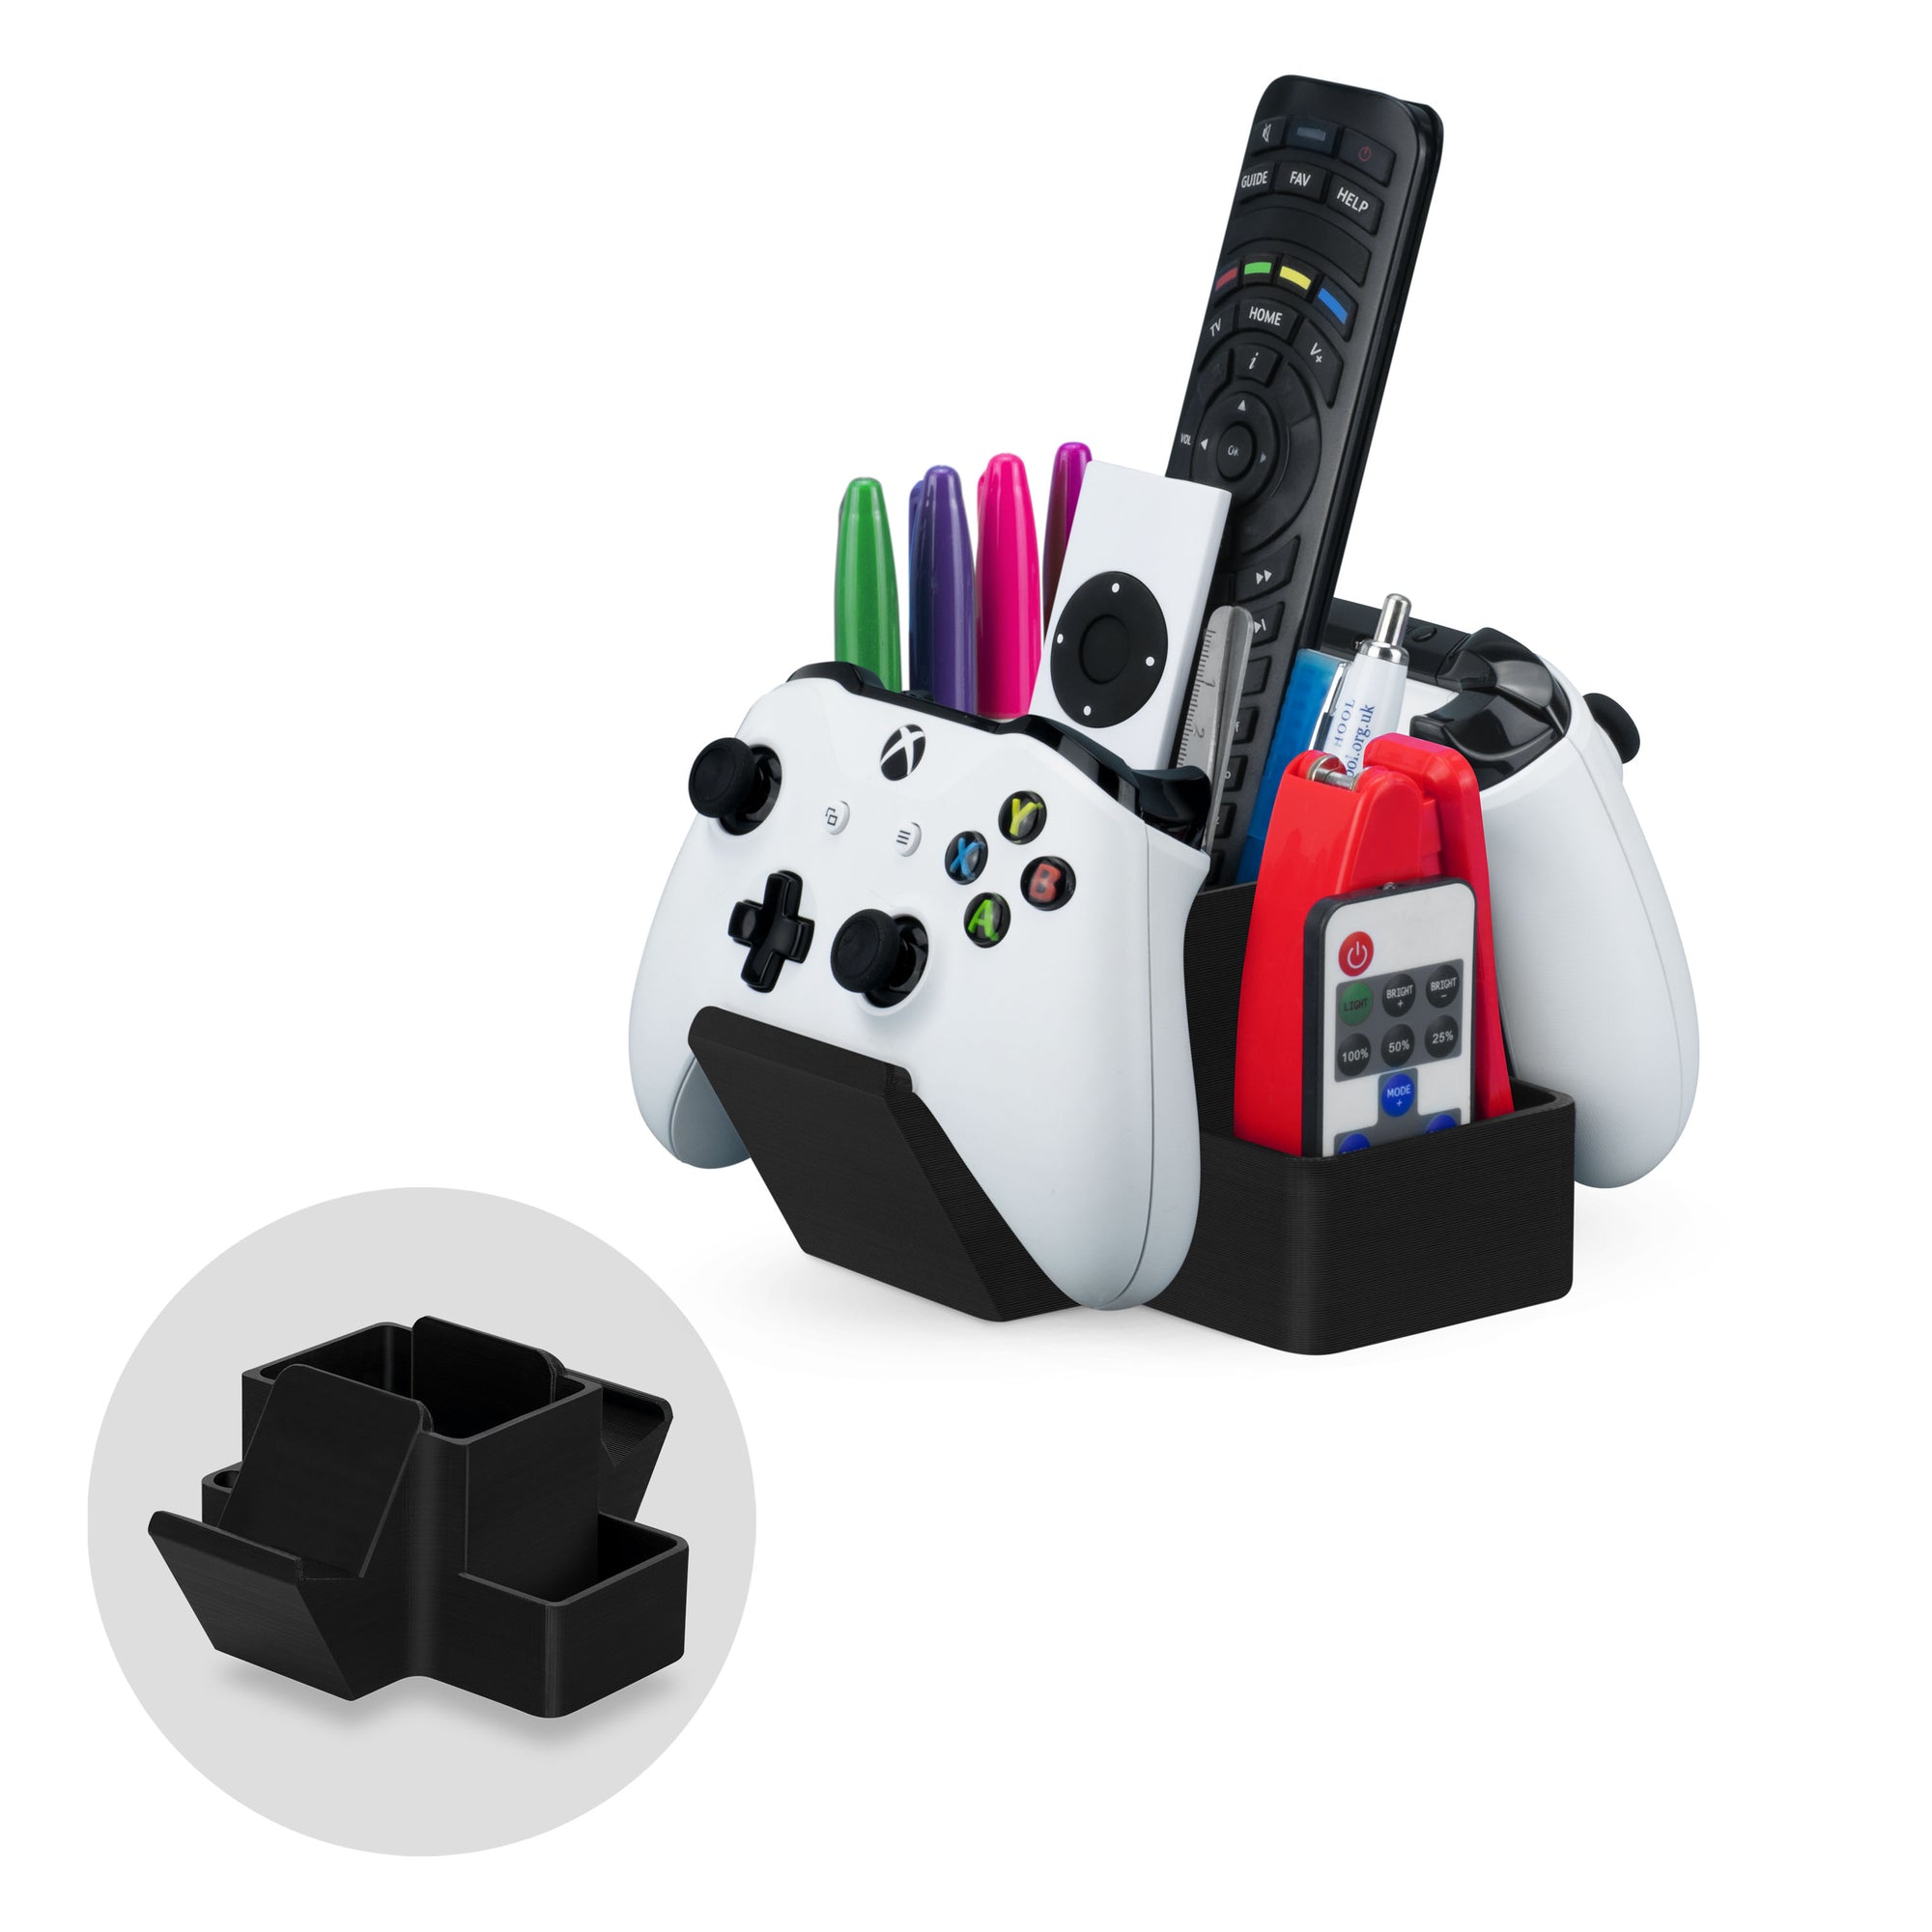 Dual Game Controller, TV Remote Control & Stationery Storage Desktop Organizer Holder, Universal Design for Xbox ONE PS5 PS4 PC Gamepads, Reduce Clutter (D03)